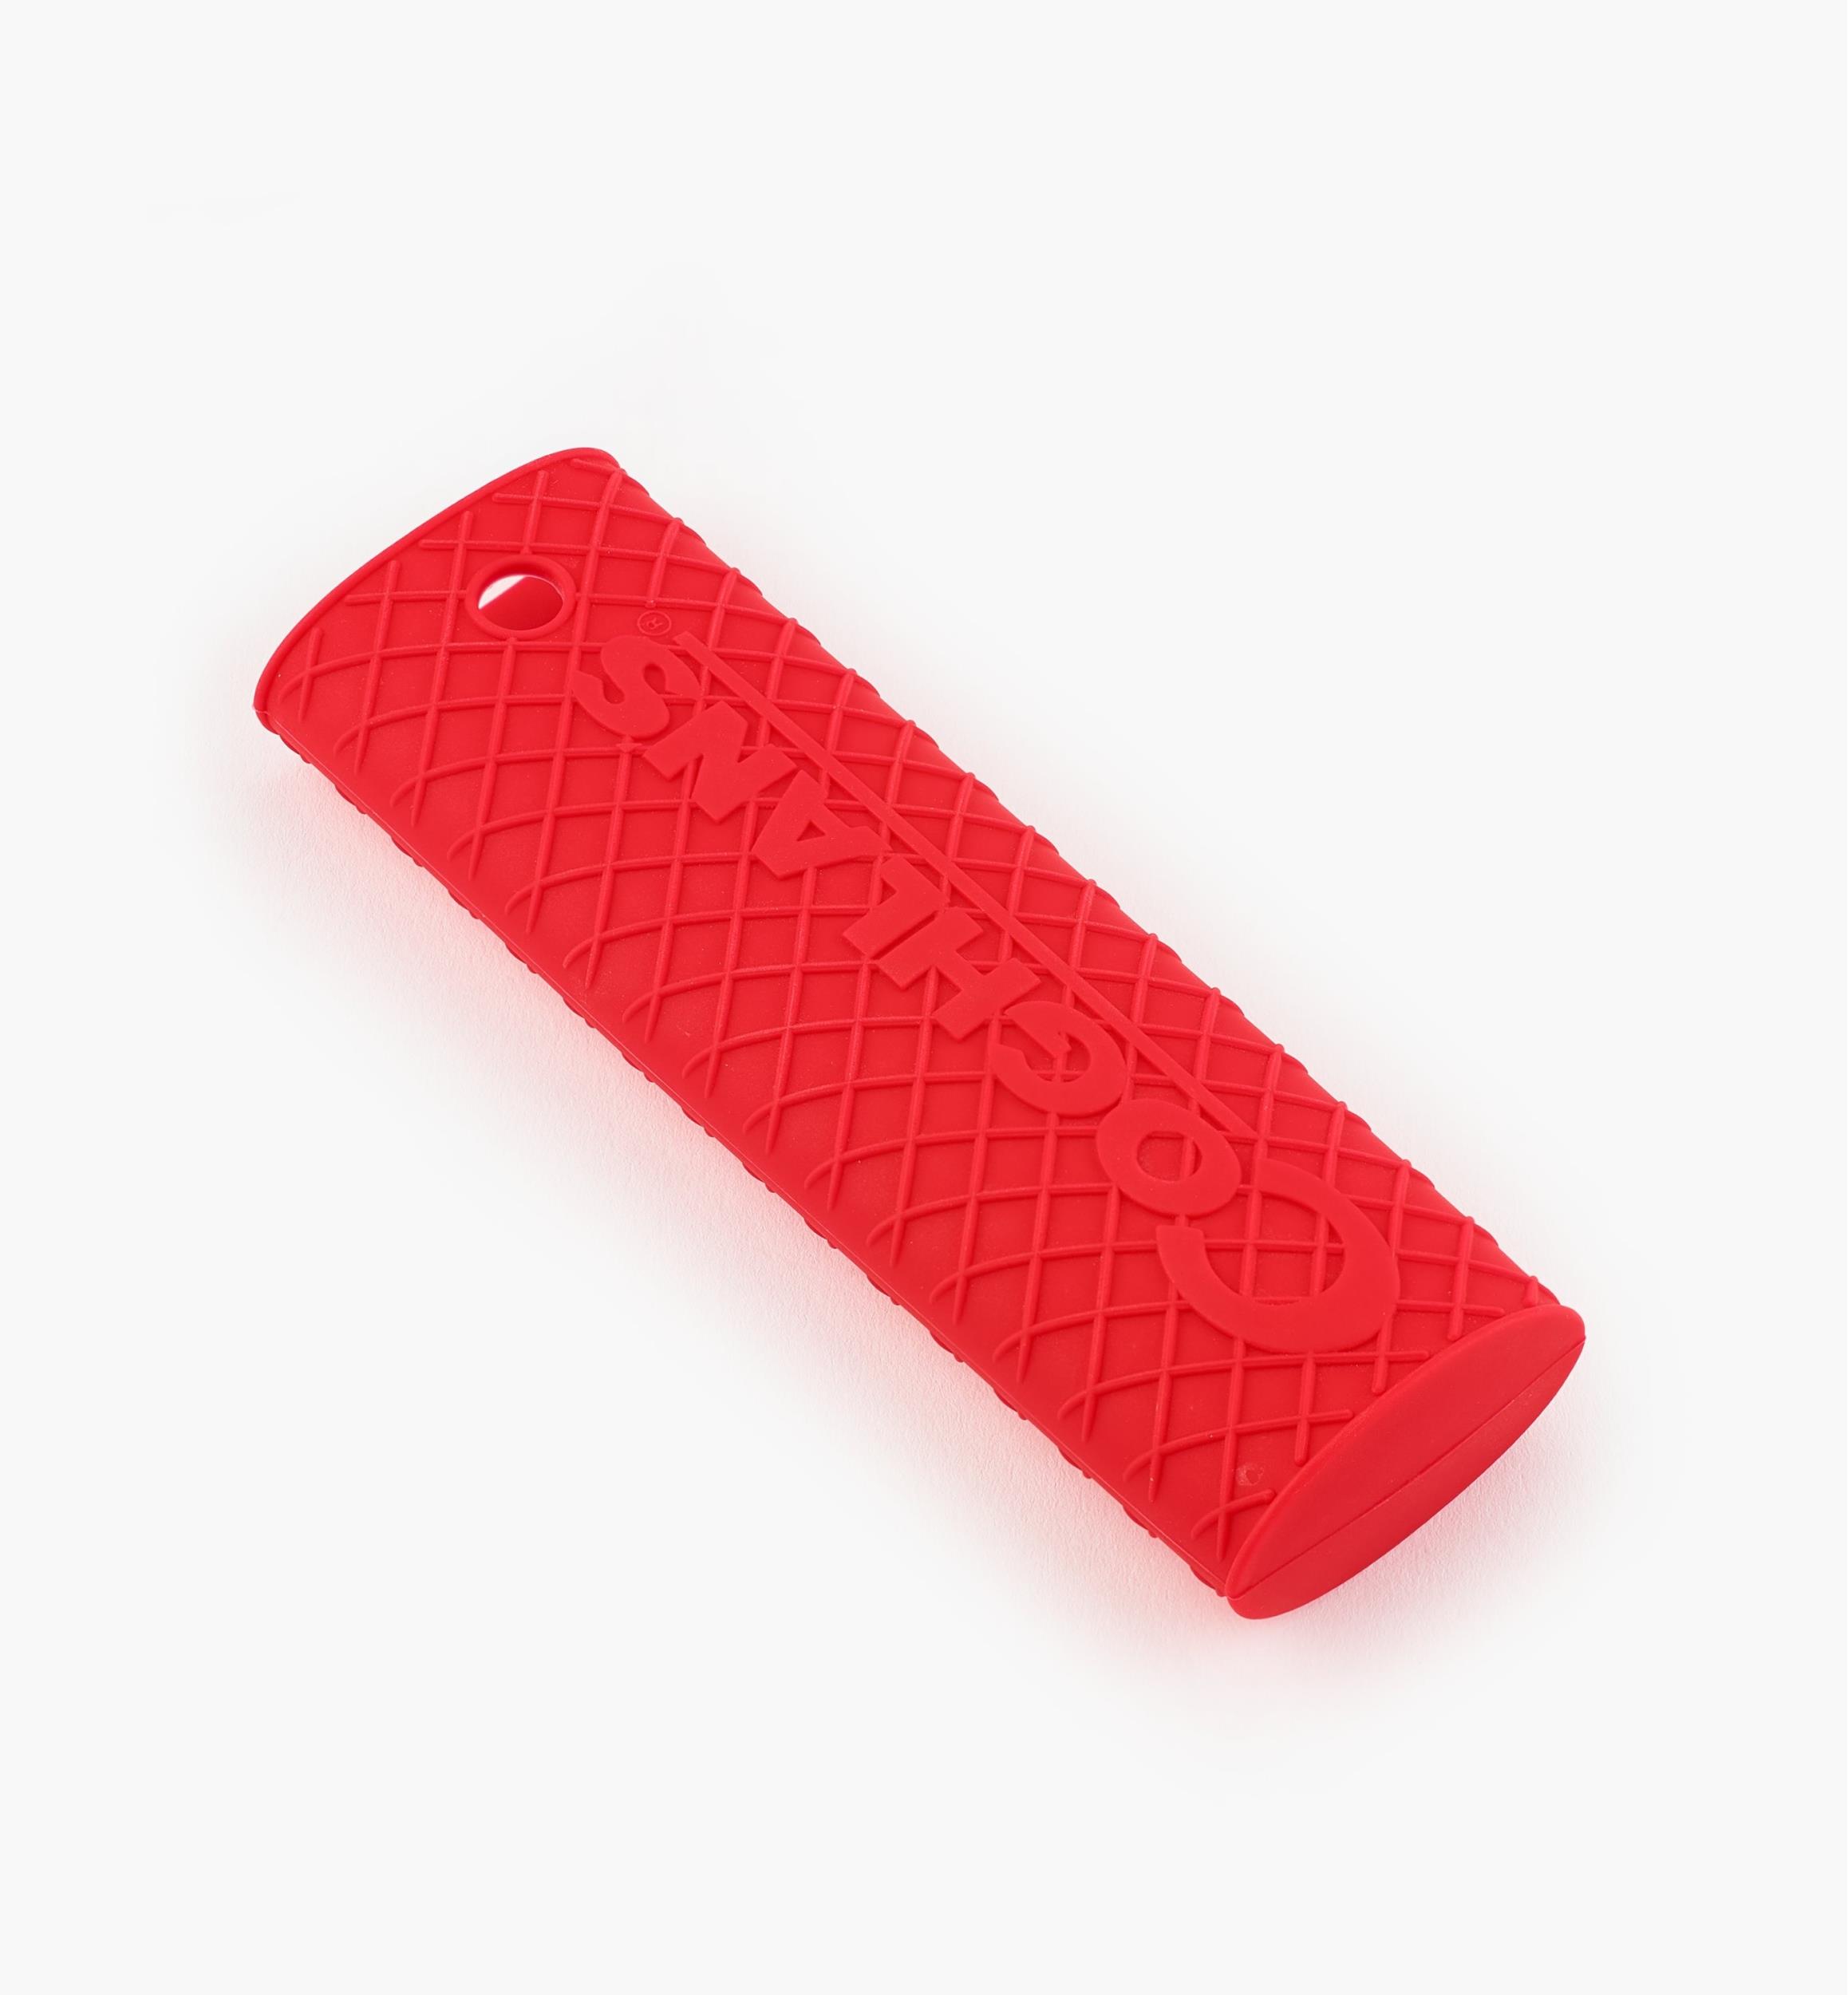 Silicone Handle Grip 